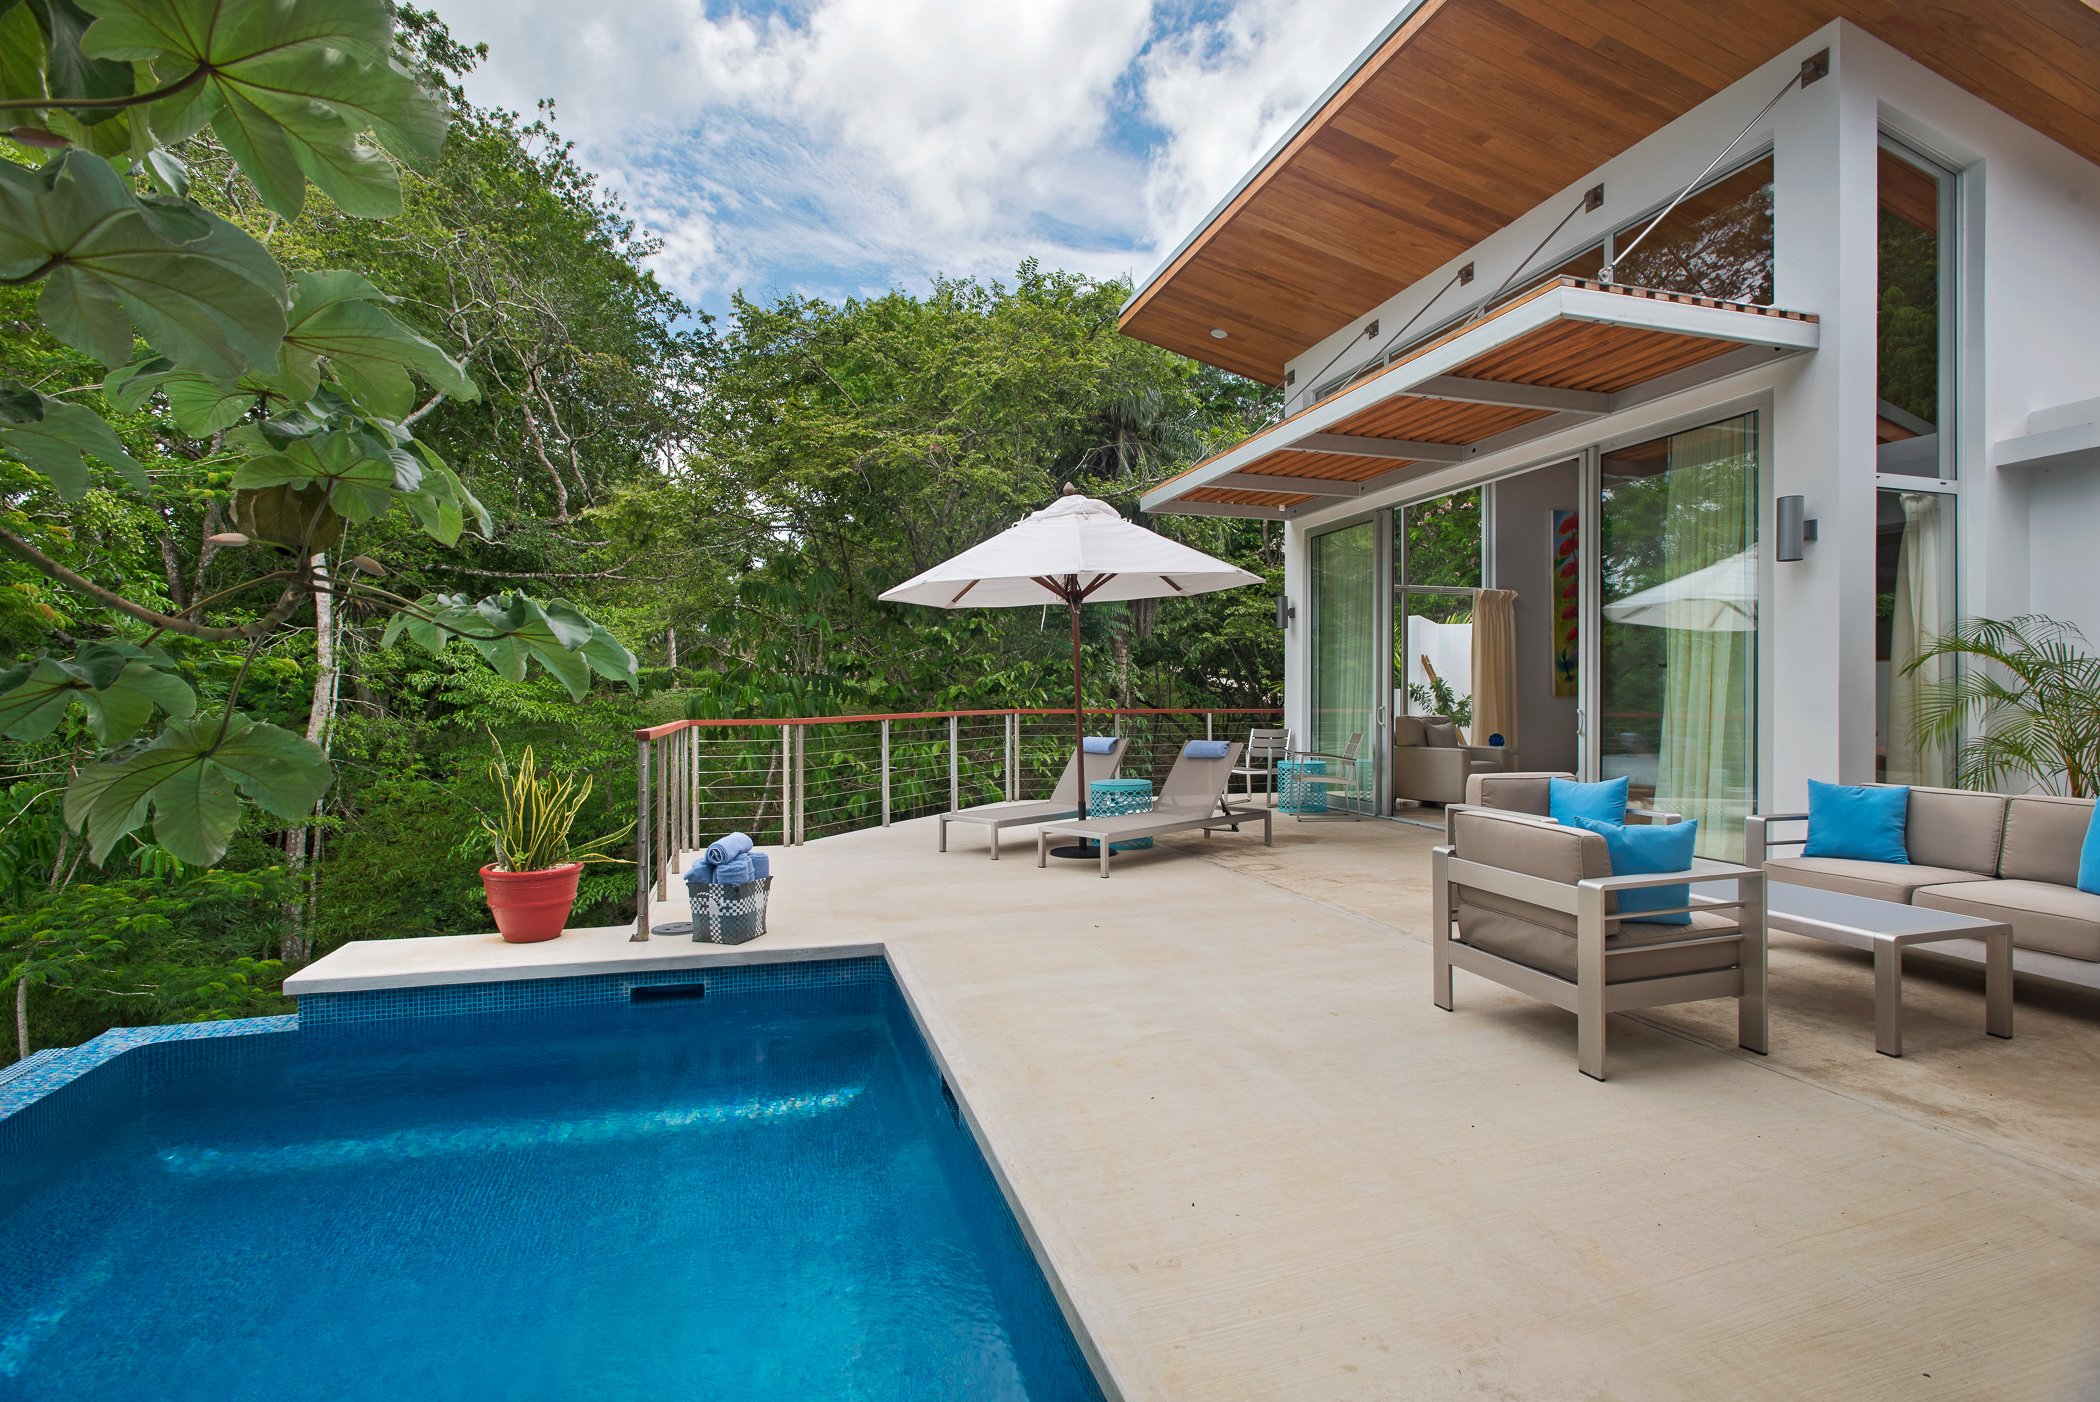 Belize Hotels | The Lodge at Chaa Creek